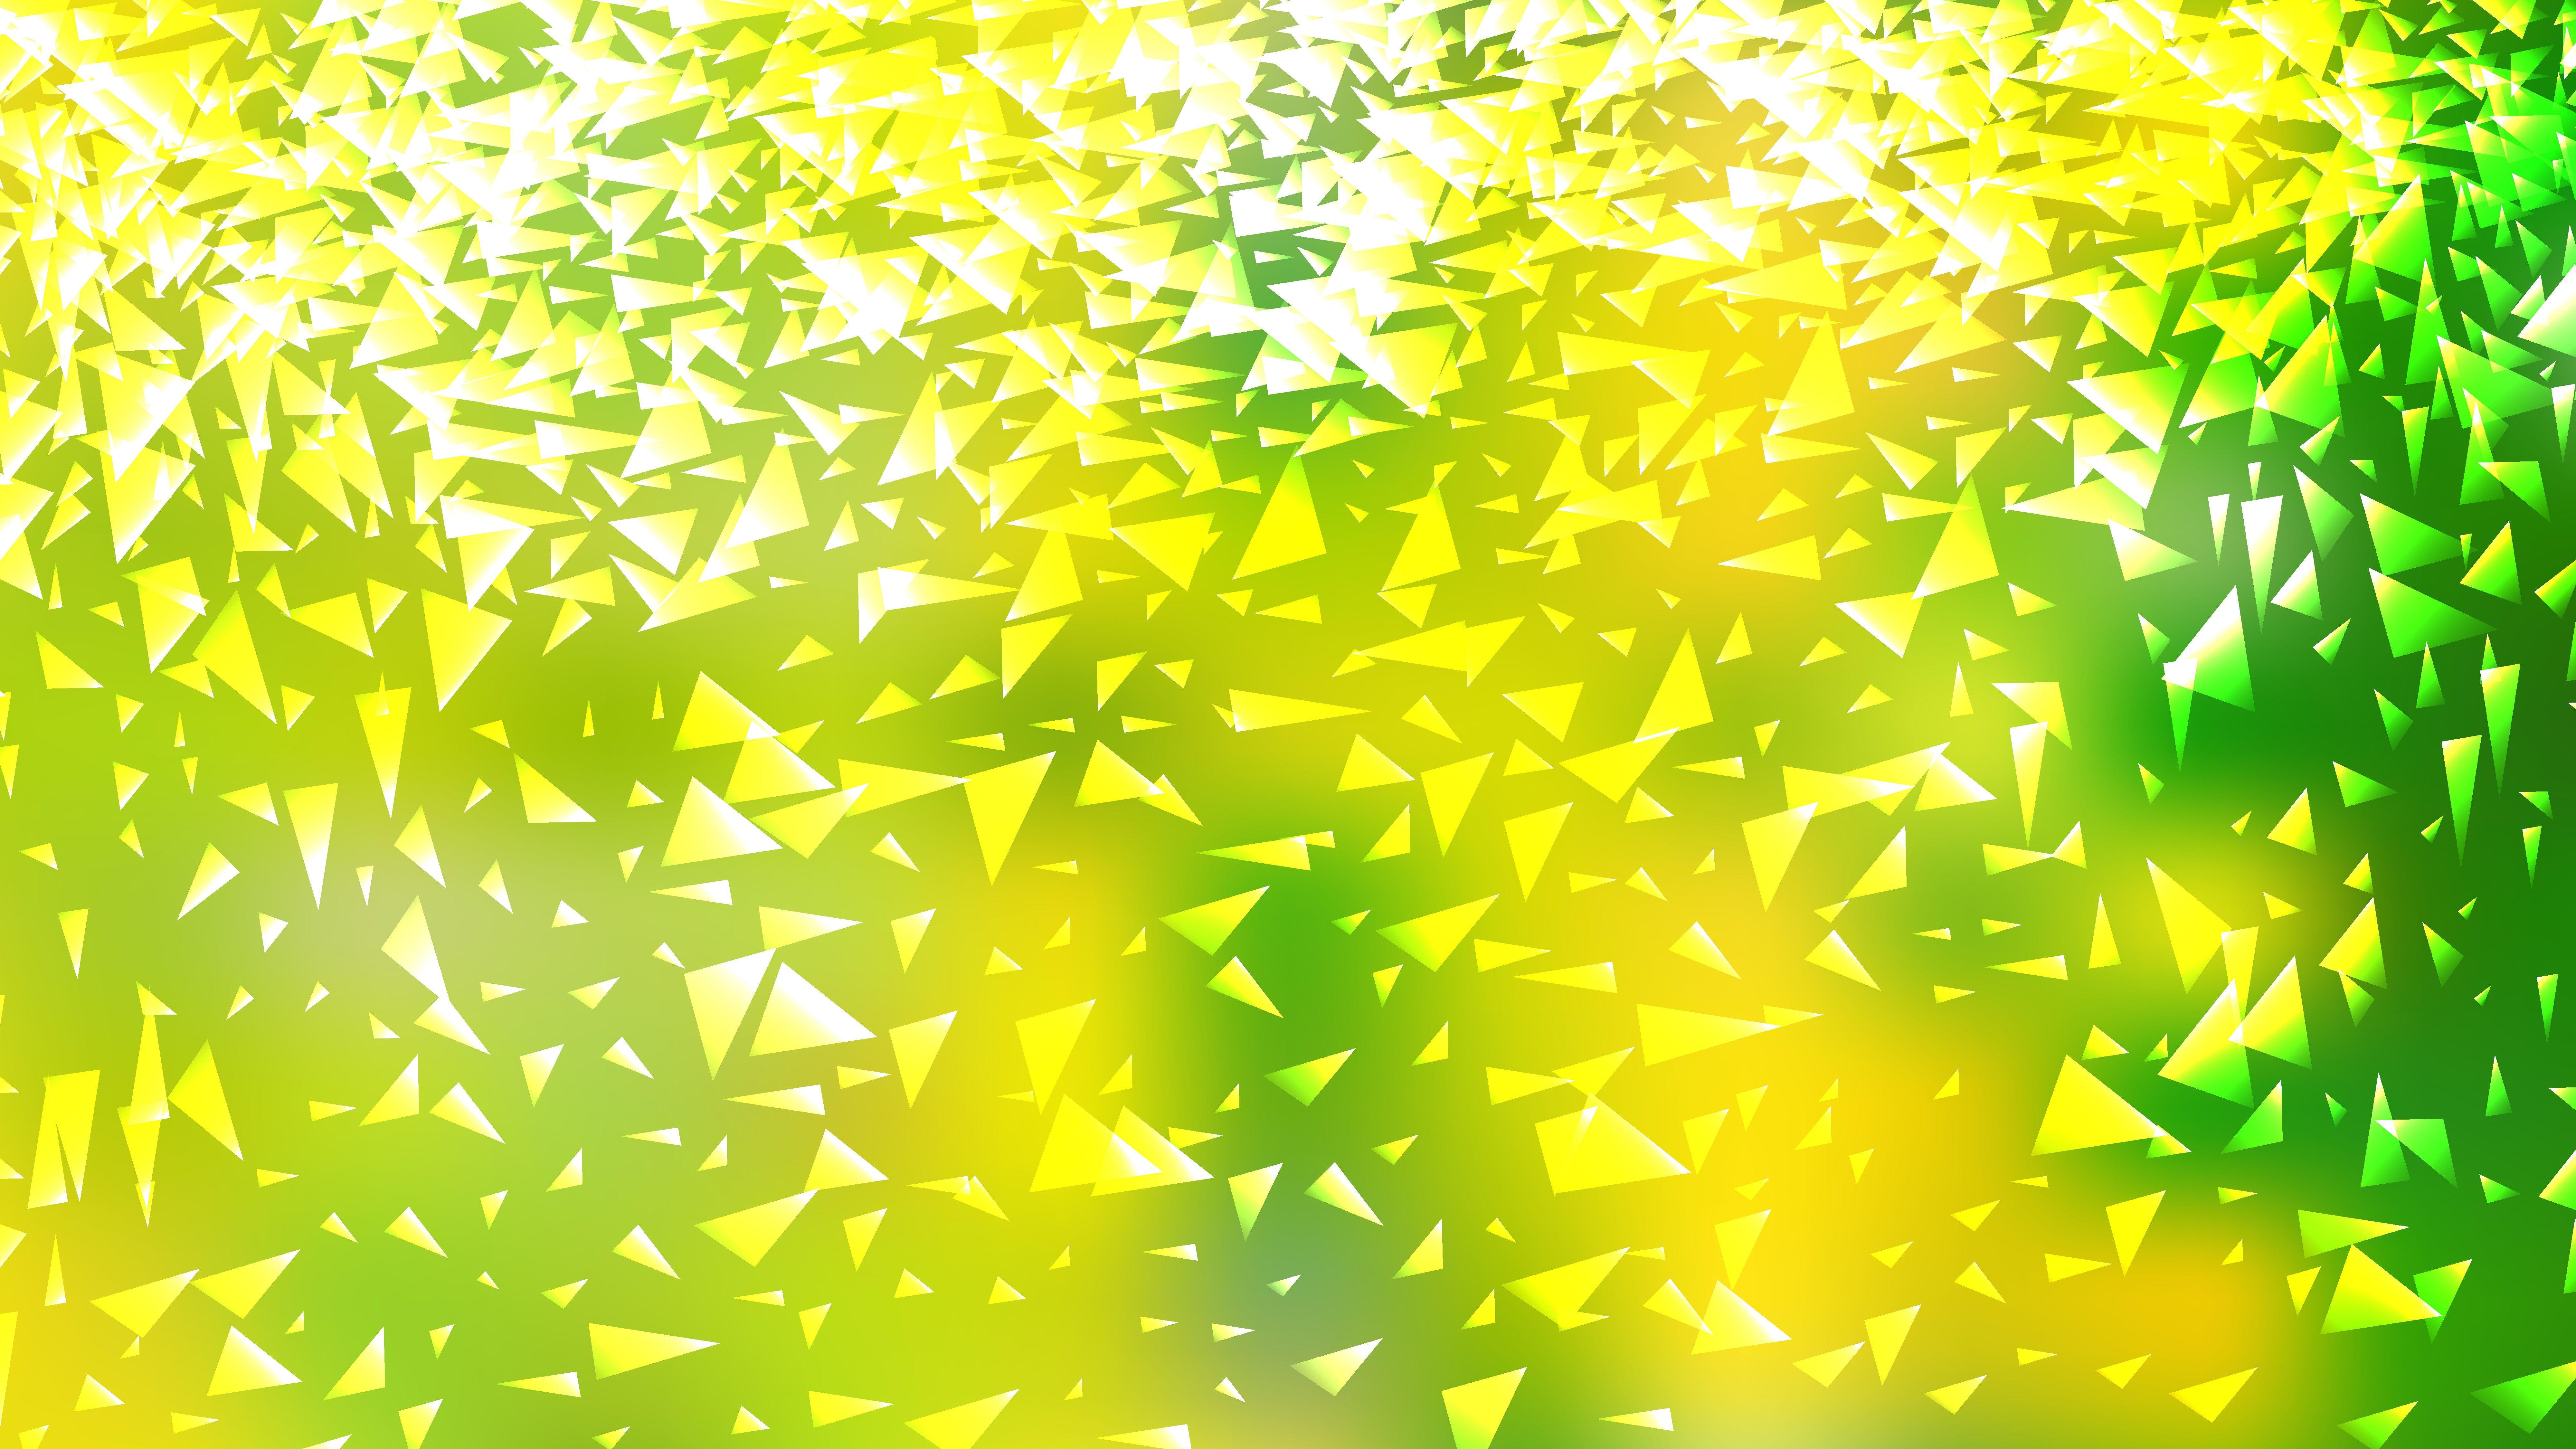 Green with Yellow Triangle Logo - 660+ Green and Yellow Background Vectors | Download Free Vector Art ...